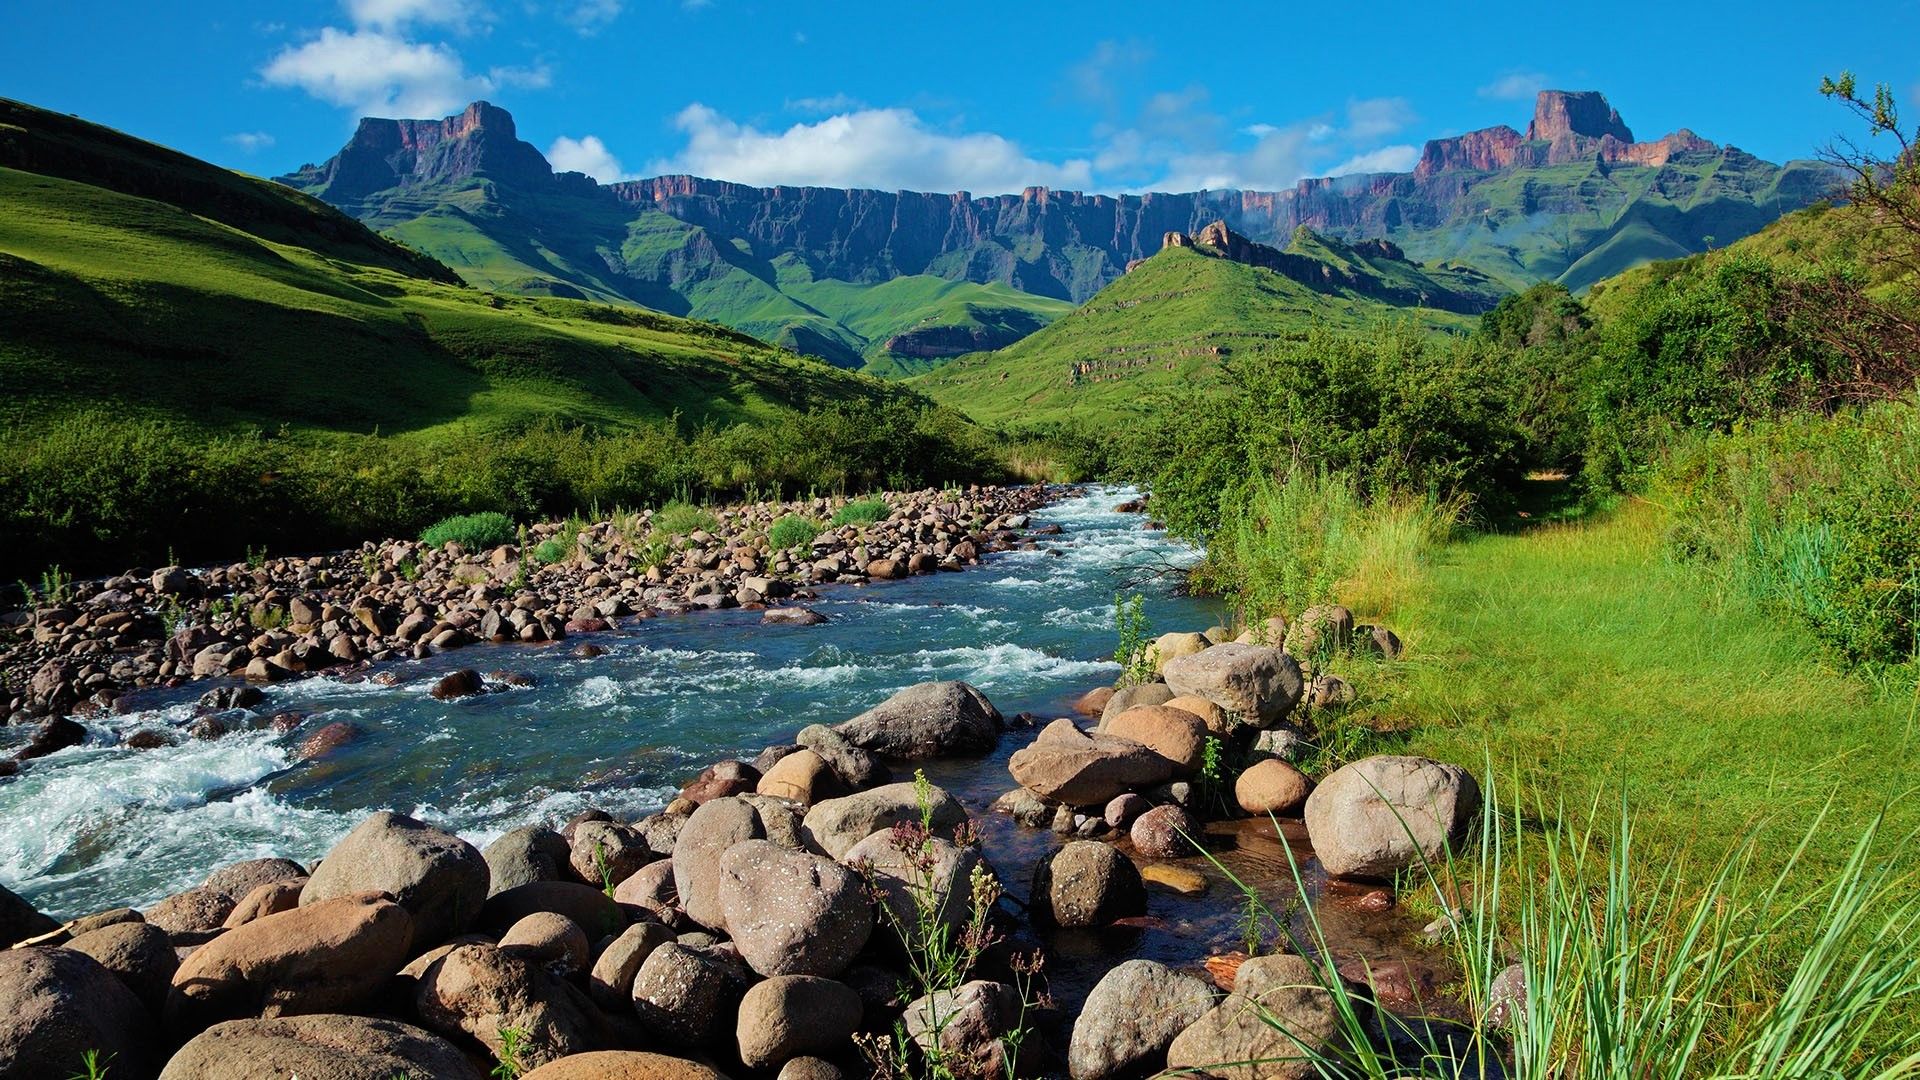 Wallpaper, nature, landscape, clouds, sky, mountains, rocks, grass, plants, spring, water, Royal Natal National Park, South Africa 1920x1080